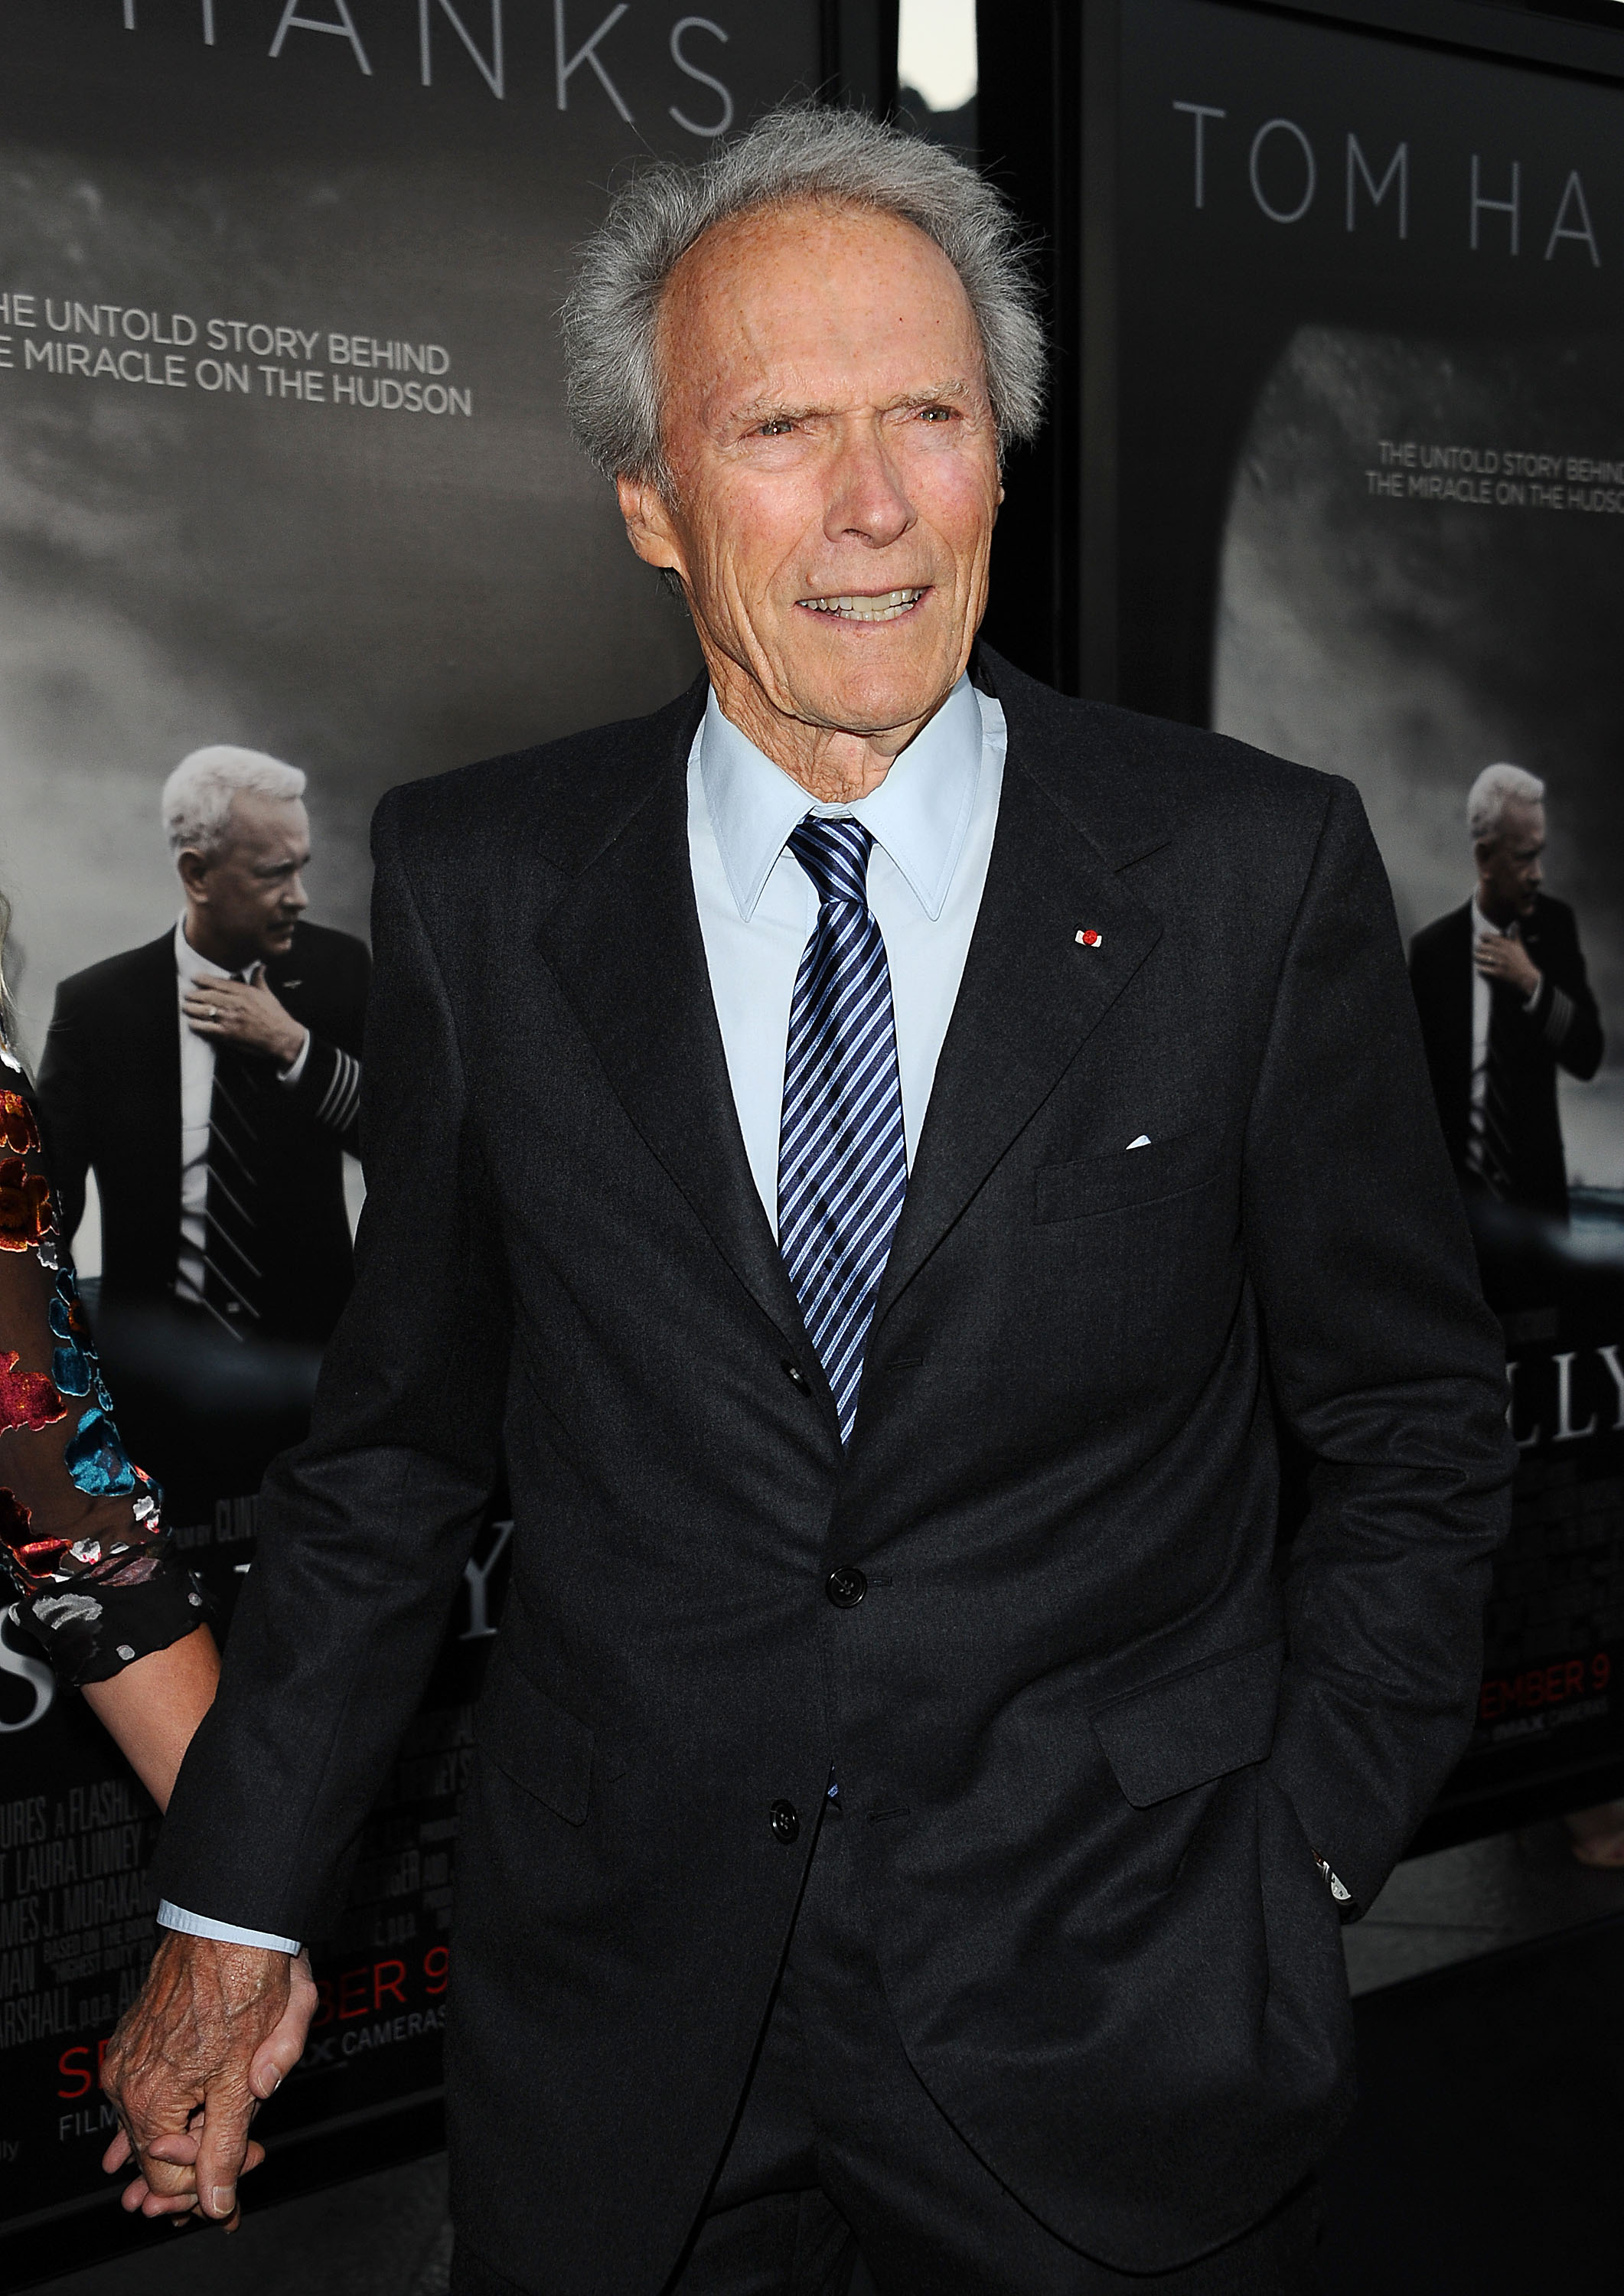 Clint Eastwood at the screening of "Sully" in Los Angeles, California on September 8, 2016 | Source: Getty Images